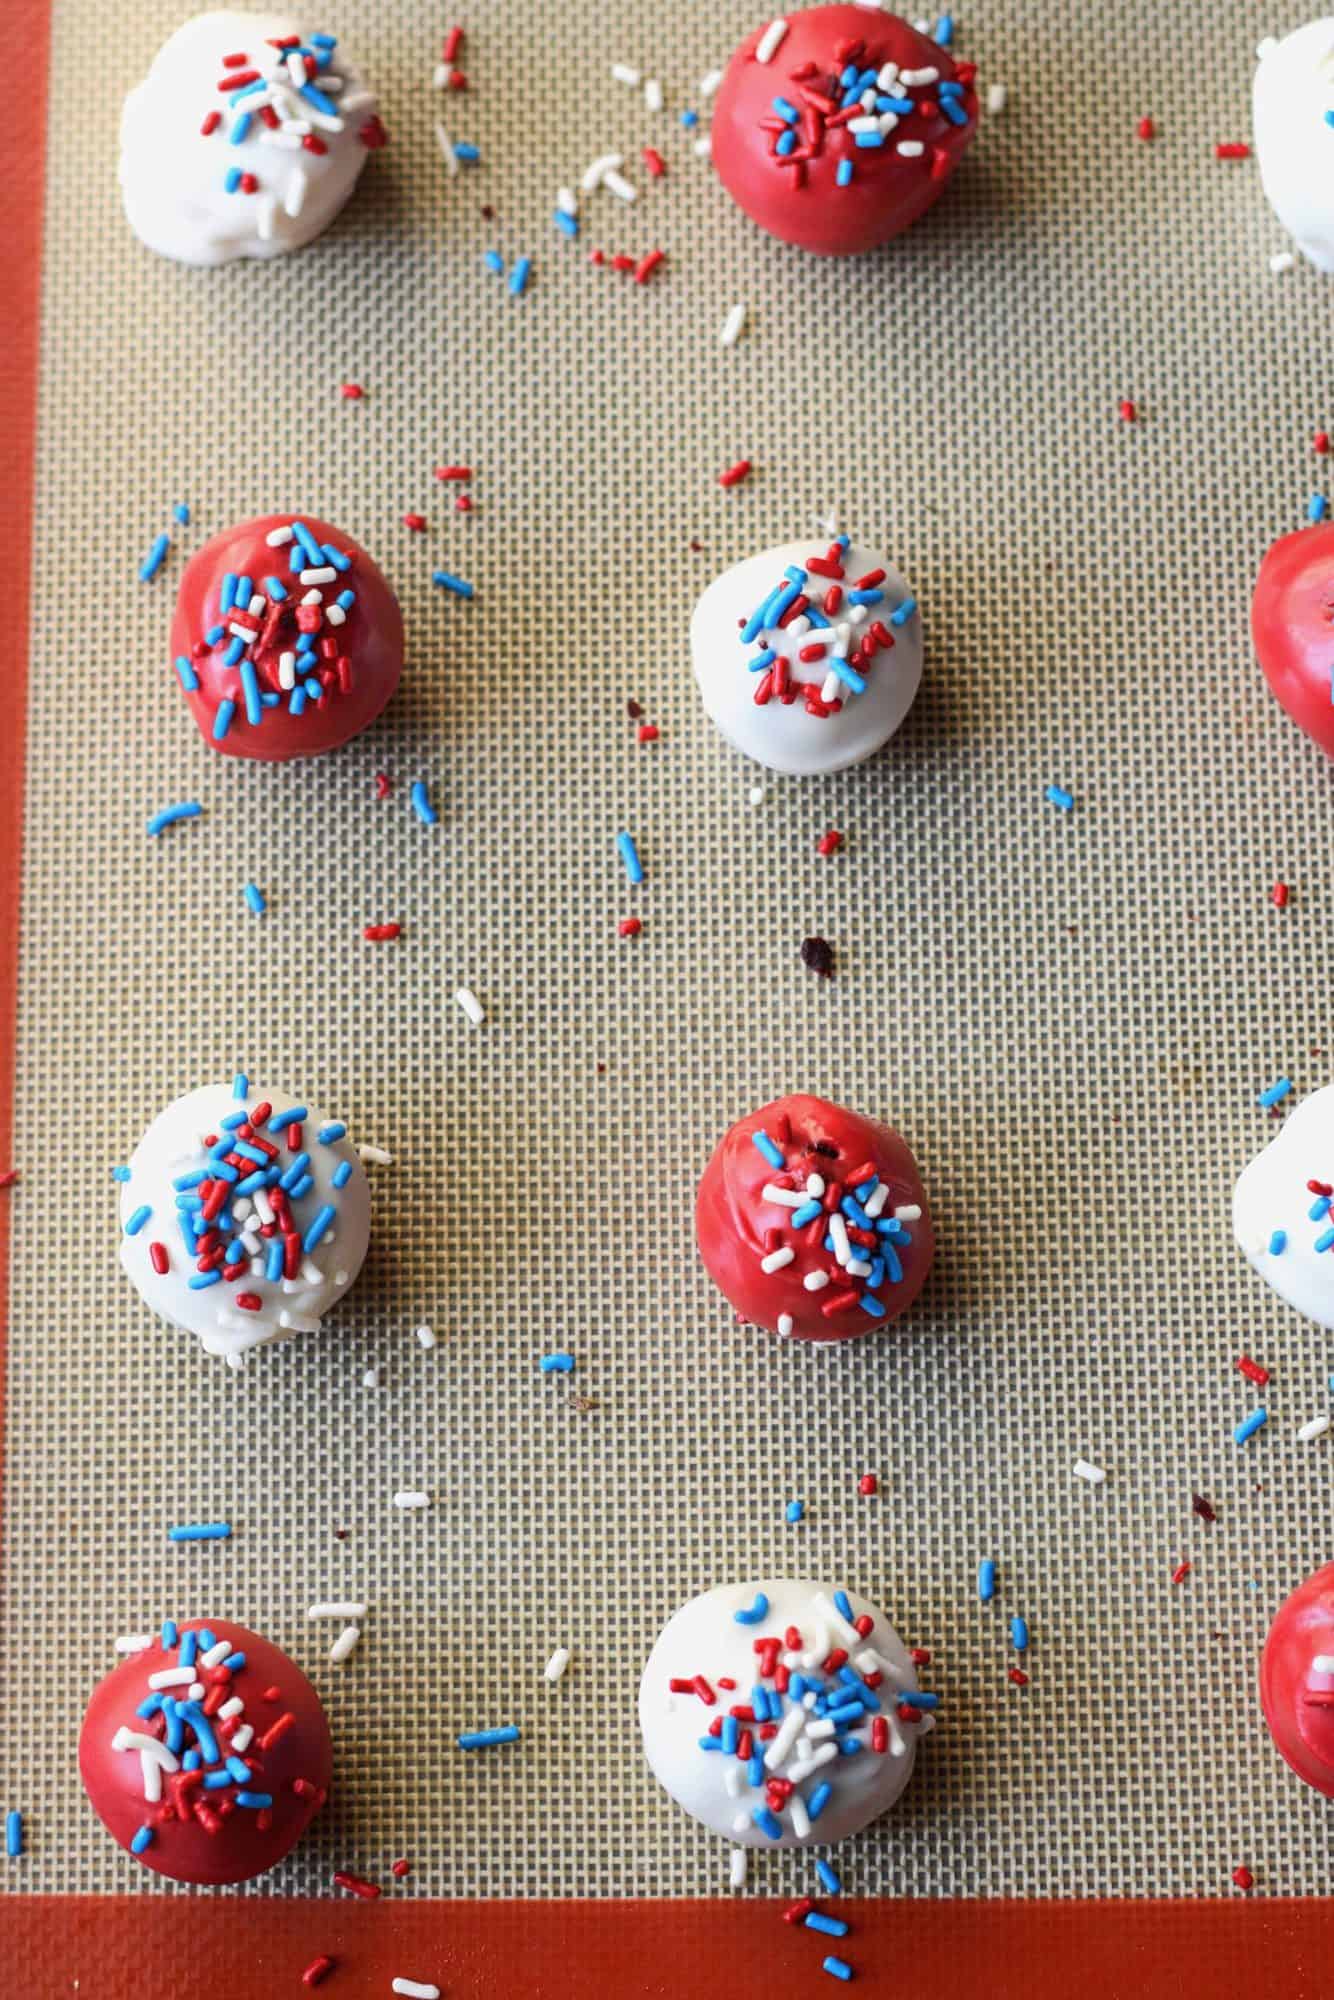 Cake balls dipped in white chocolate and red colored chocolate with festive sprinkles on top placed on a baking sheet to dry.